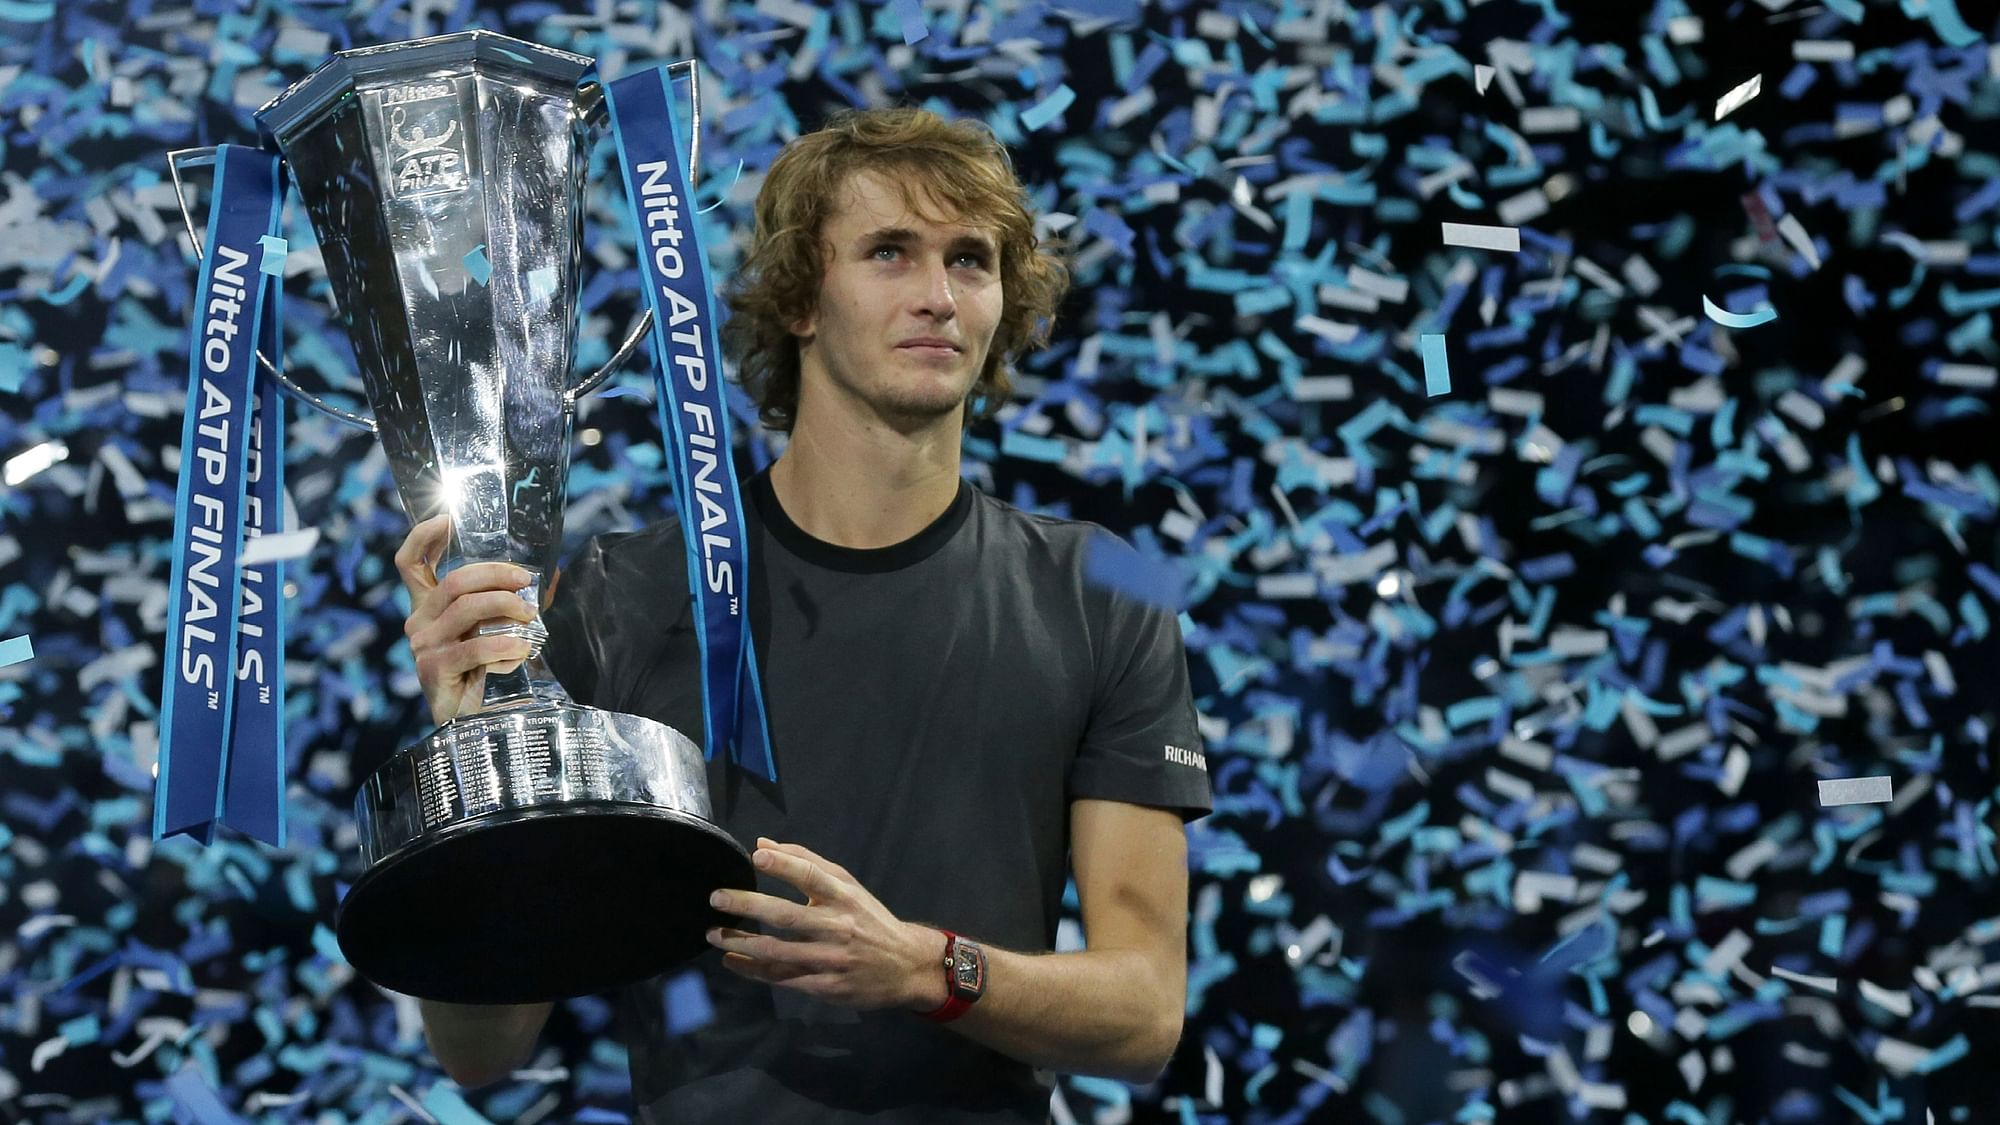 Alexander Zverev becomes the youngest champion at the ATP Finals since 2008